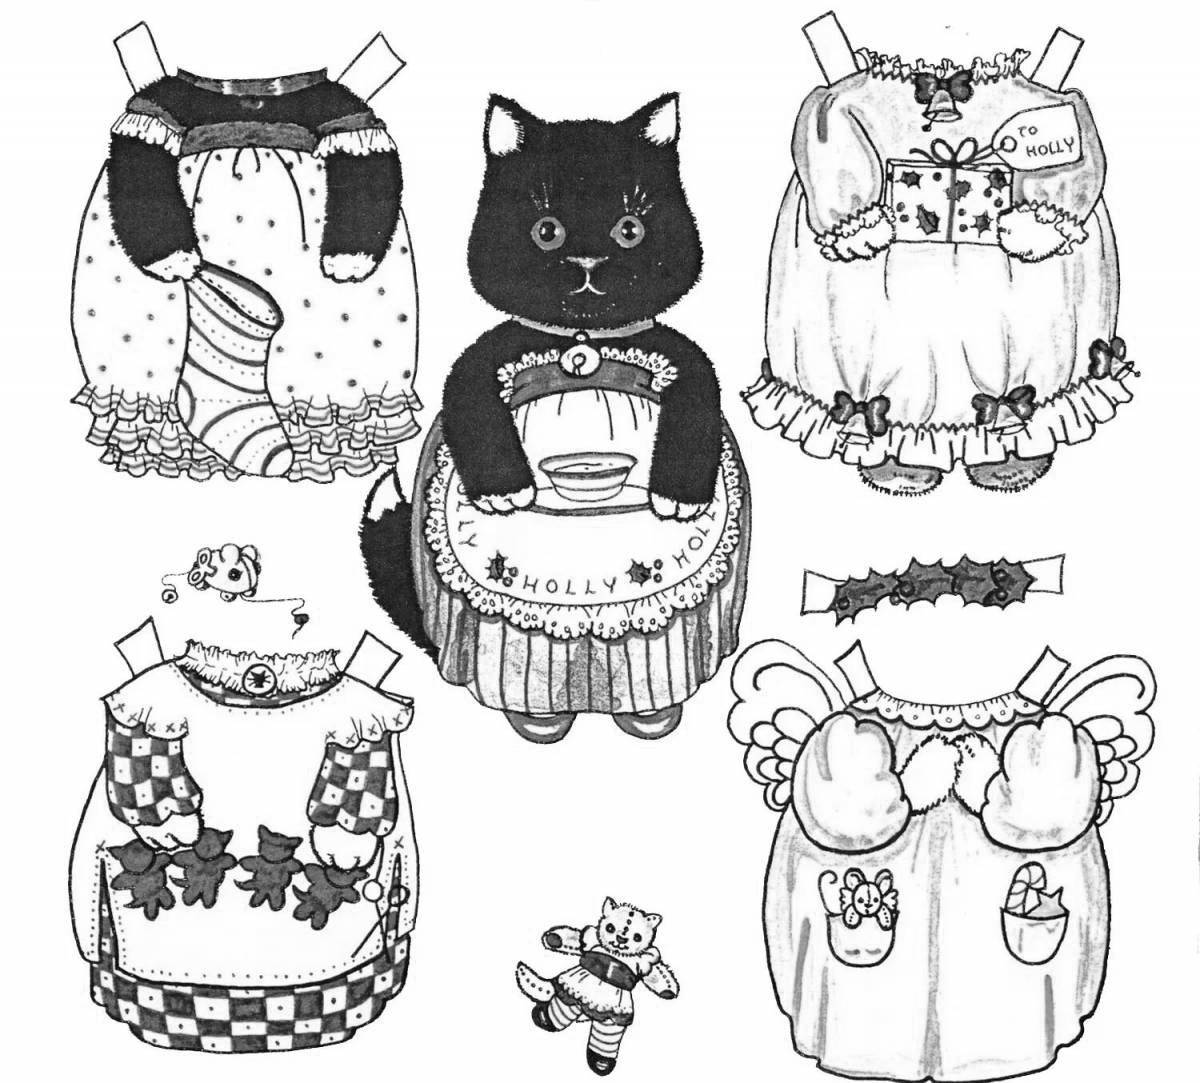 Cheerful cat with clothes